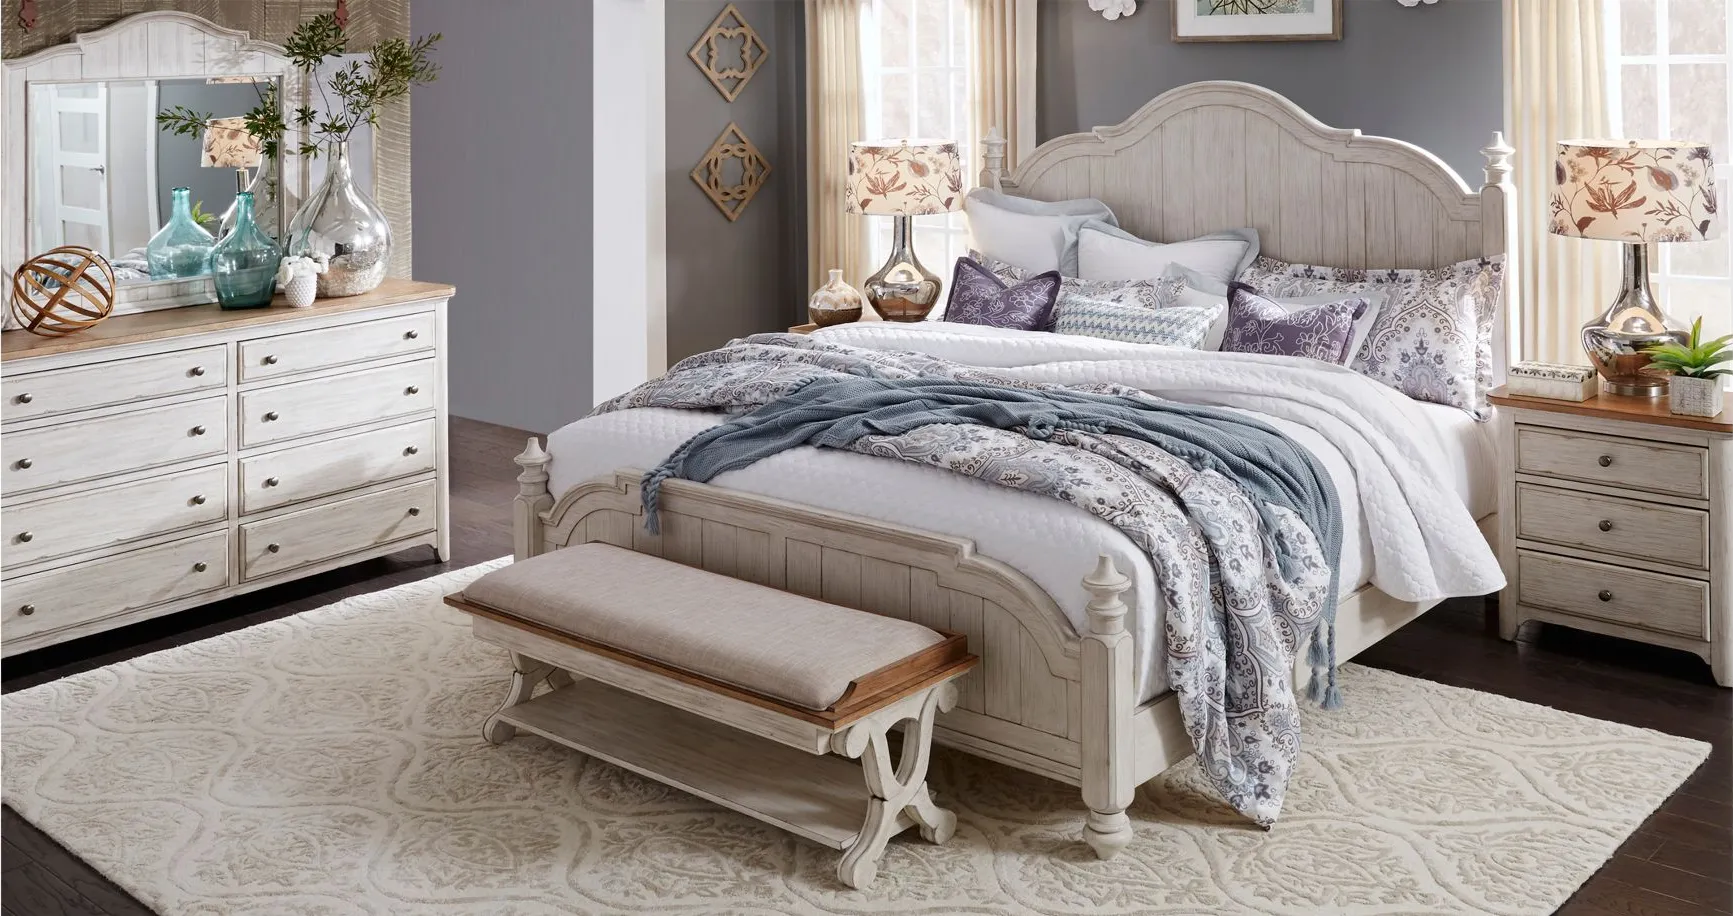 Farmhouse Reimagined 4-pc. Bedroom Set w/ Drawer Nightstand in White by Liberty Furniture